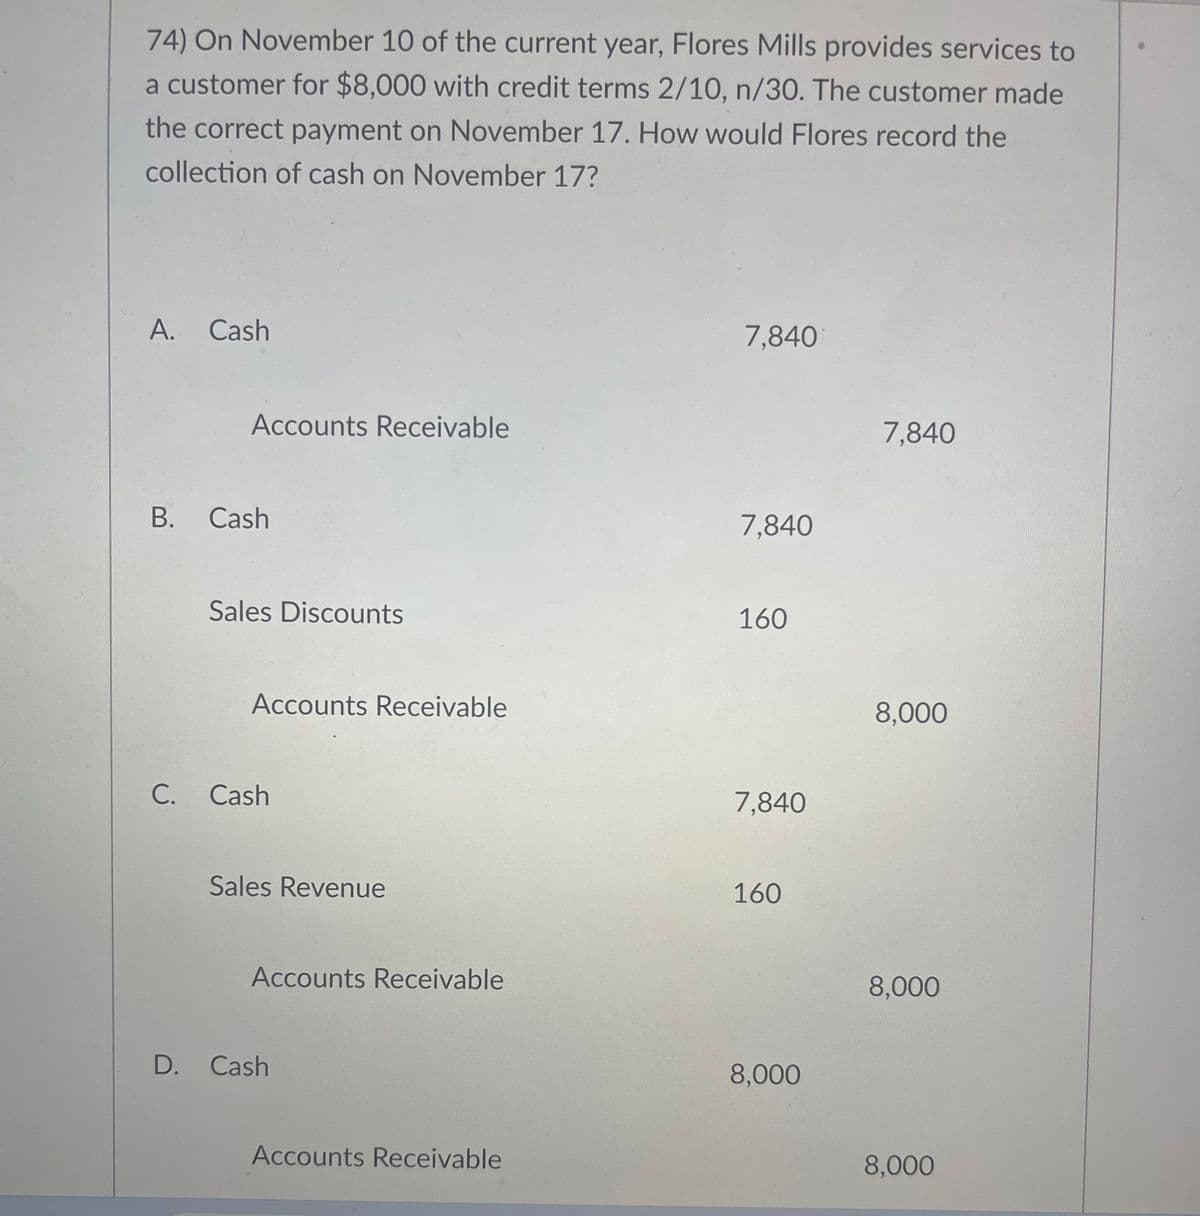 74) On November 10 of the current year, Flores Mills provides services to
a customer for $8,000 with credit terms 2/10, n/30. The customer made
the correct payment on November 17. How would Flores record the
collection of cash on November 17?
A. Cash
Accounts Receivable
B. Cash
Sales Discounts
Accounts Receivable
C. Cash
Sales Revenue
Accounts Receivable
D. Cash
Accounts Receivable
7,840
7,840
160
7,840
160
8,000
7,840
8,000
8,000
8,000